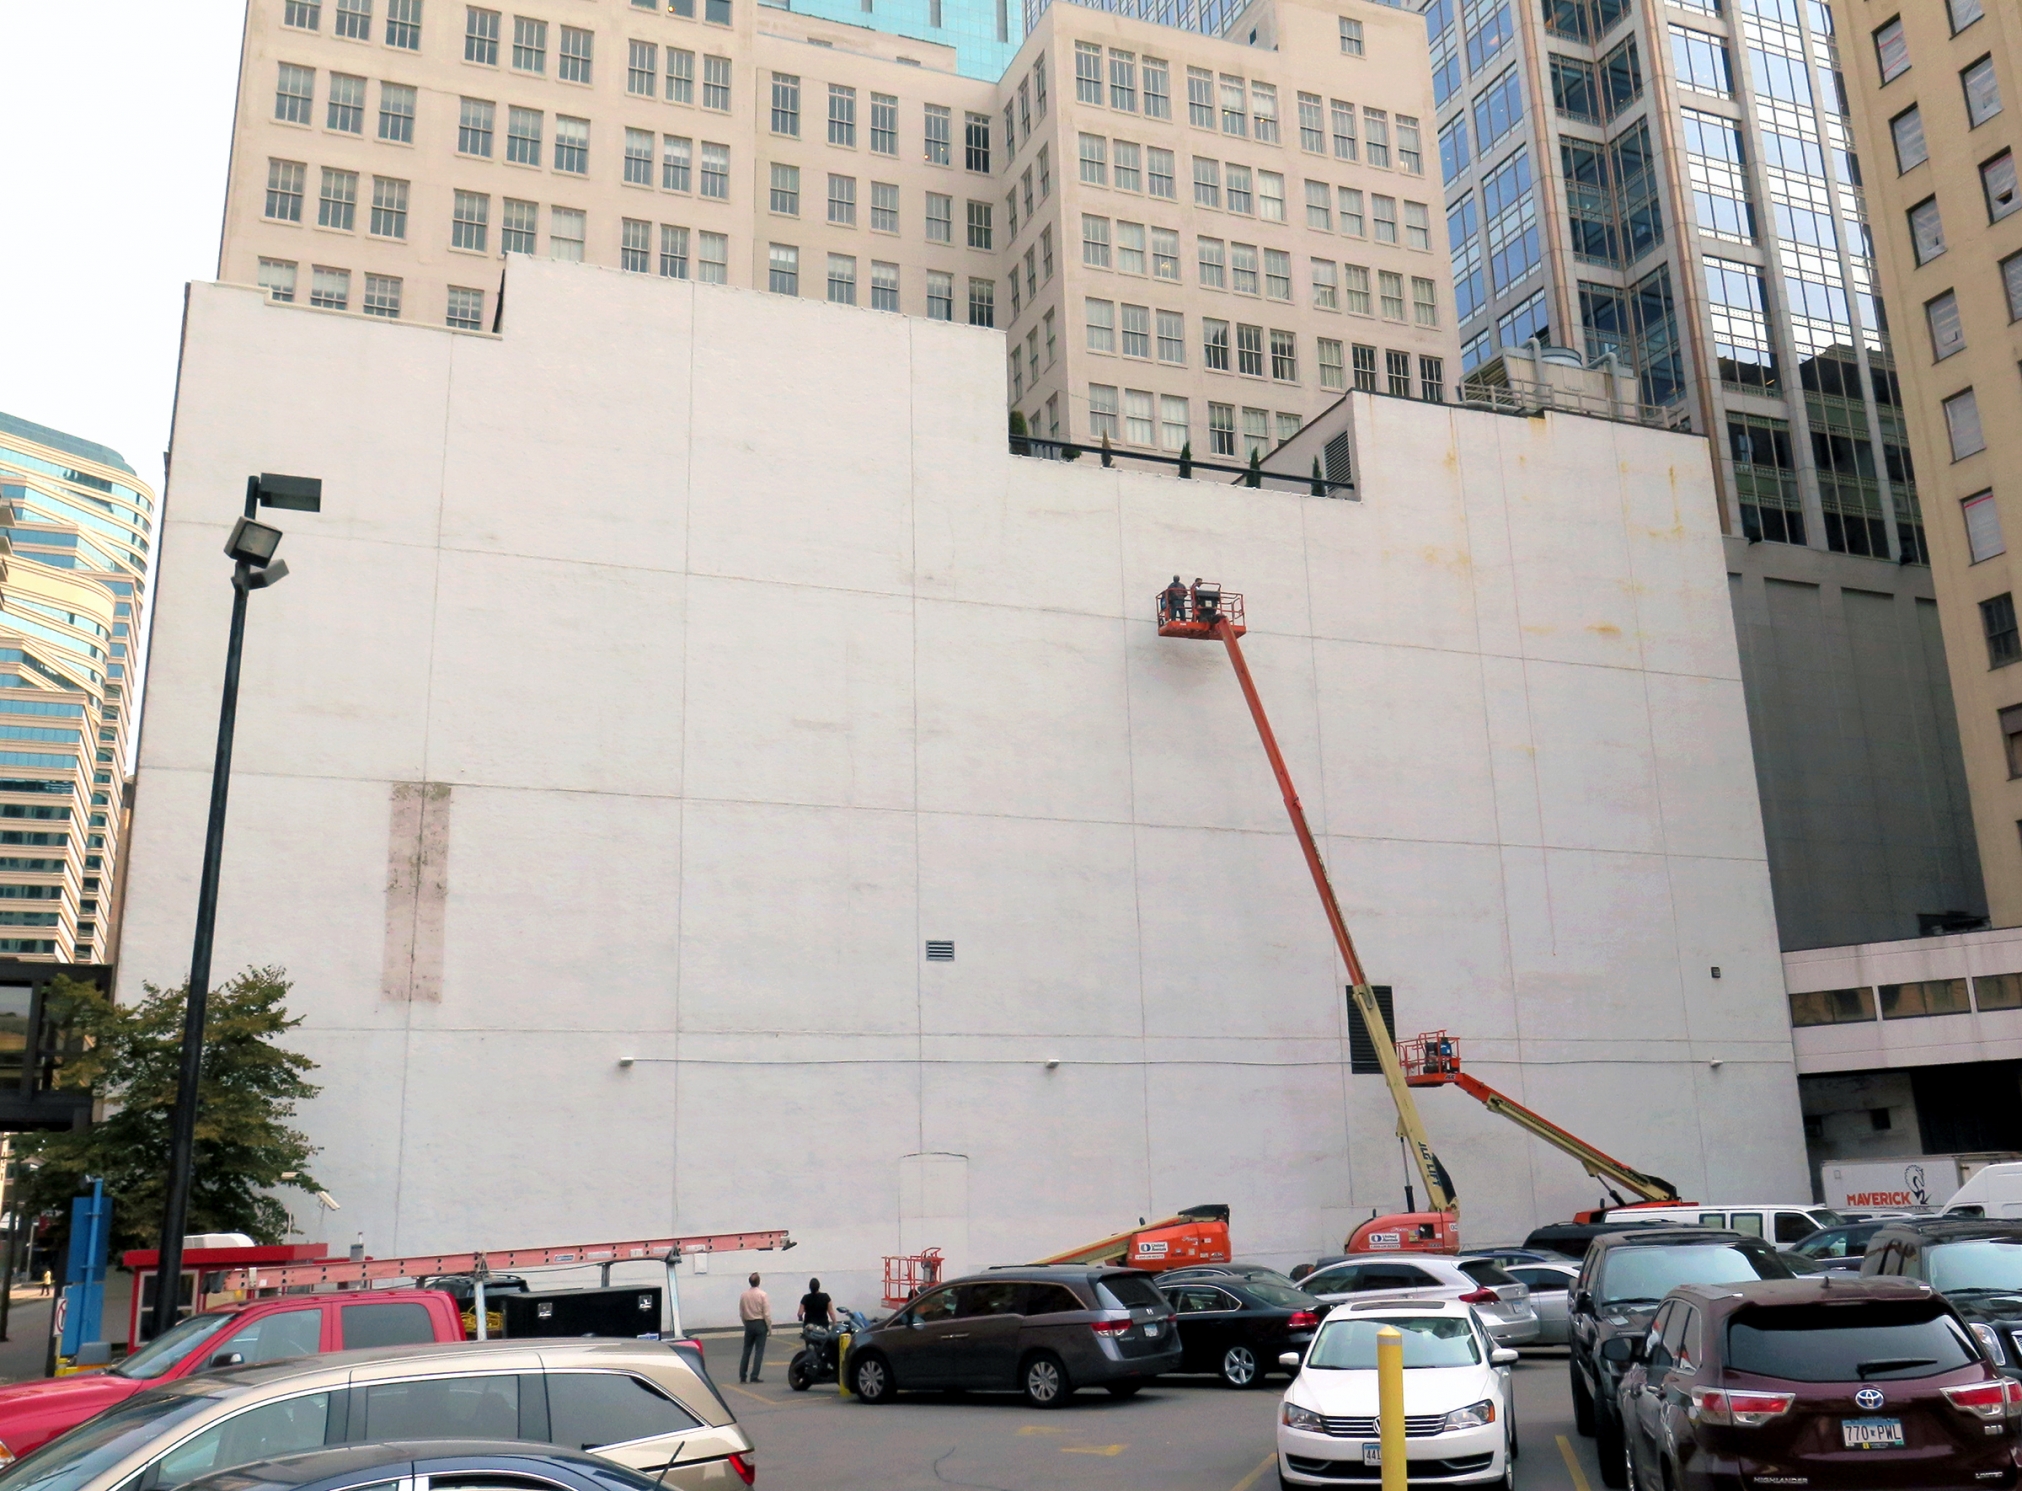  The blank white wall facing the corner of 5th and Hennepin Ave will become the 'canvas' for a mural by Brazillian artist Kobra- with an image of Bob Dylan. Photo taken 8/25 as work begins. 